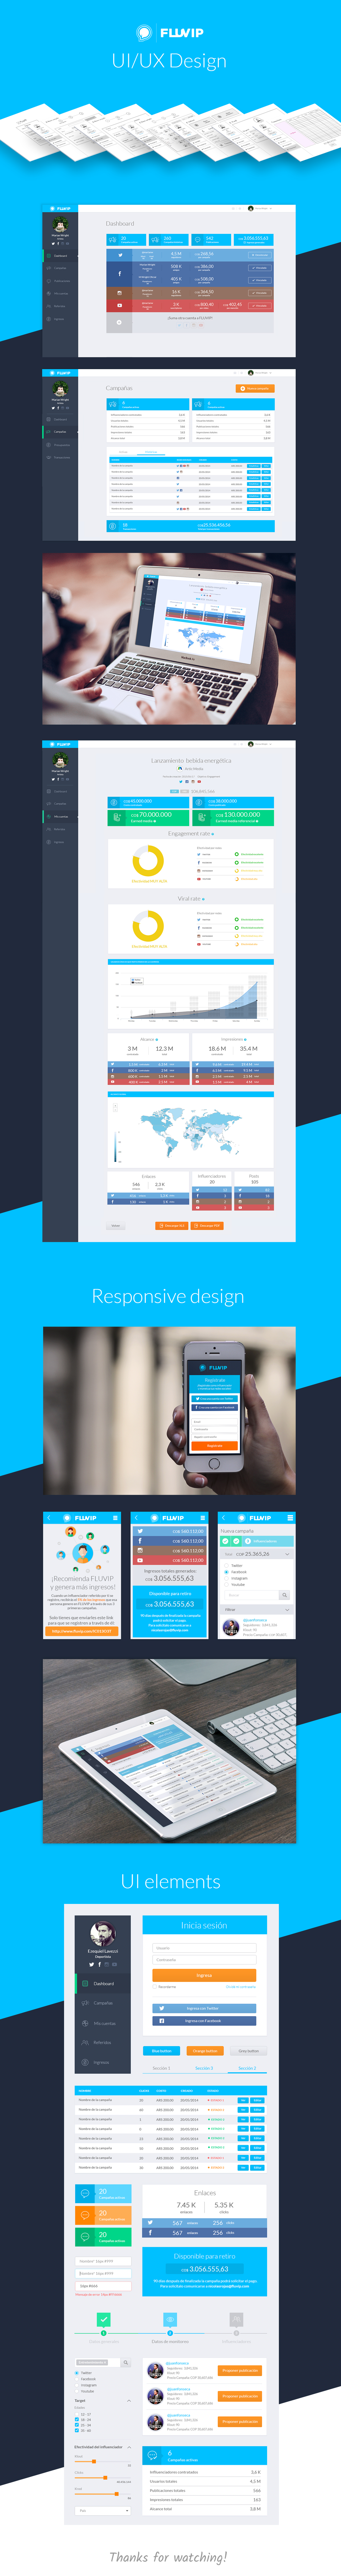 interaction Web Responsive mobile design user interface user experience UI ux